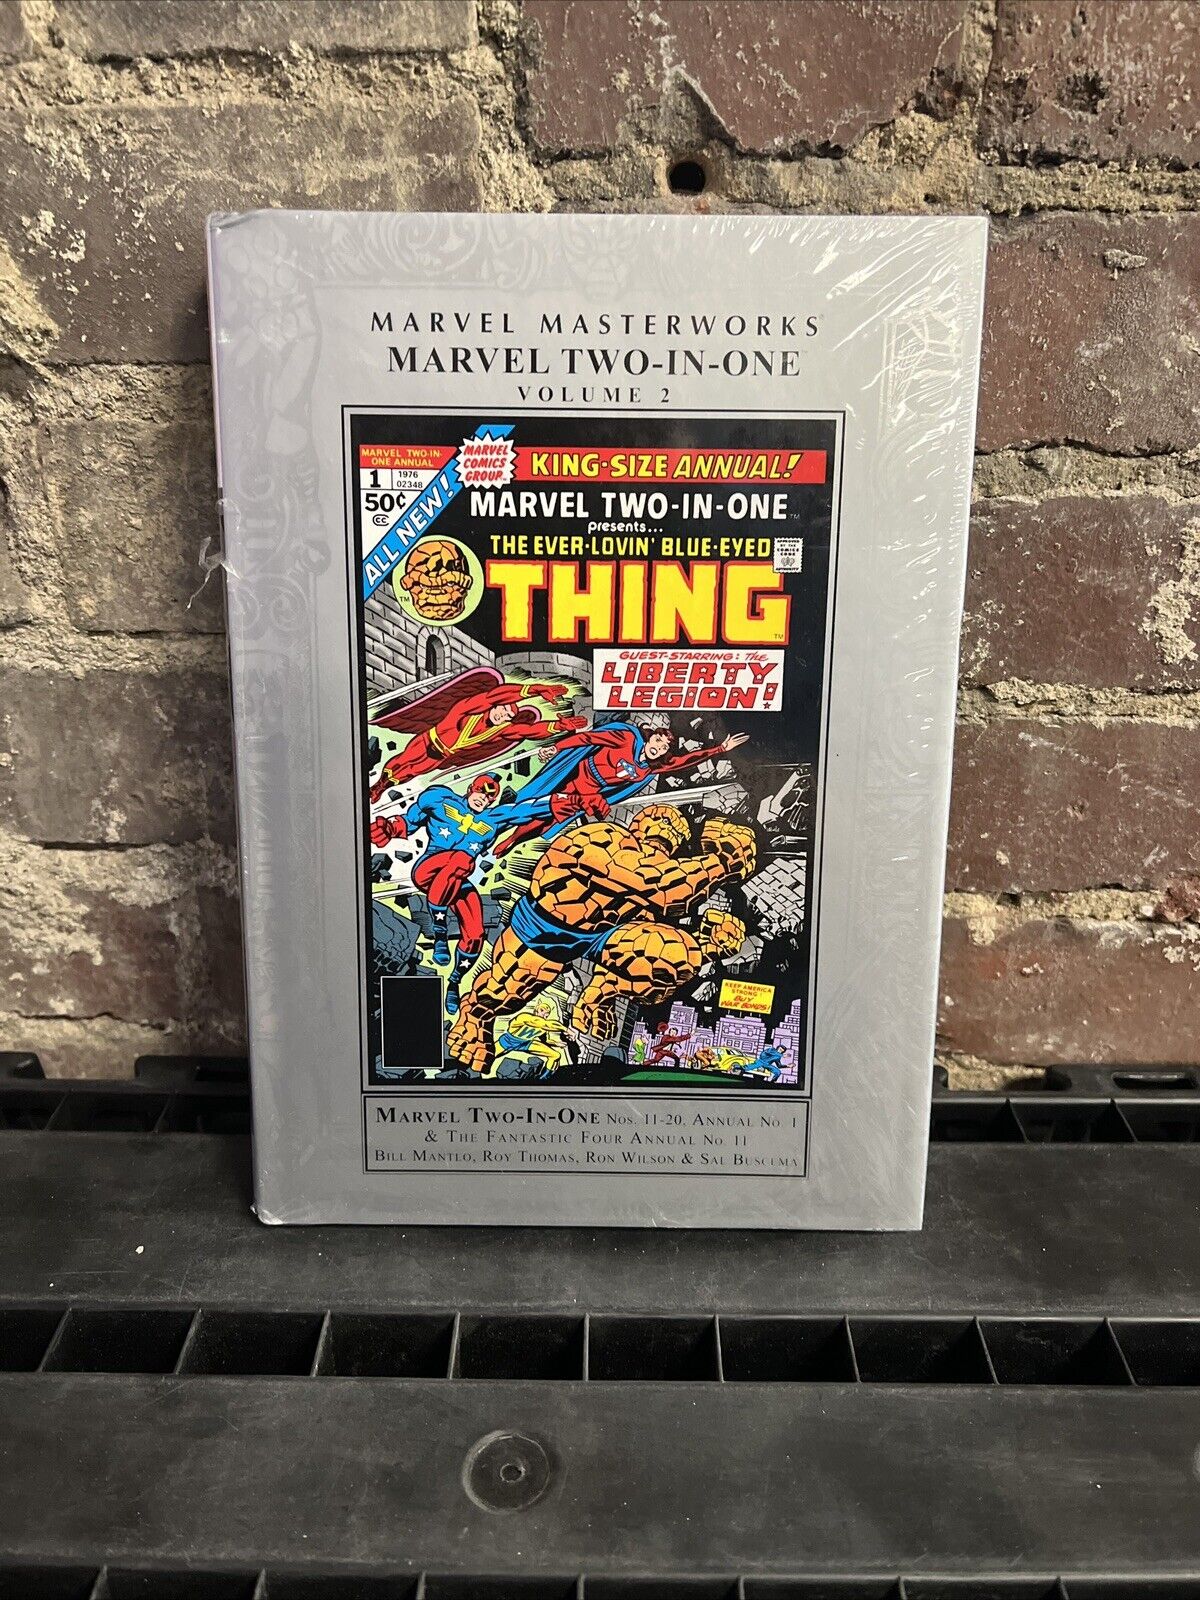 The THING -Marvel Two-In-One Volume 2 Marvel Masterworks - Hard Cover New Sealed